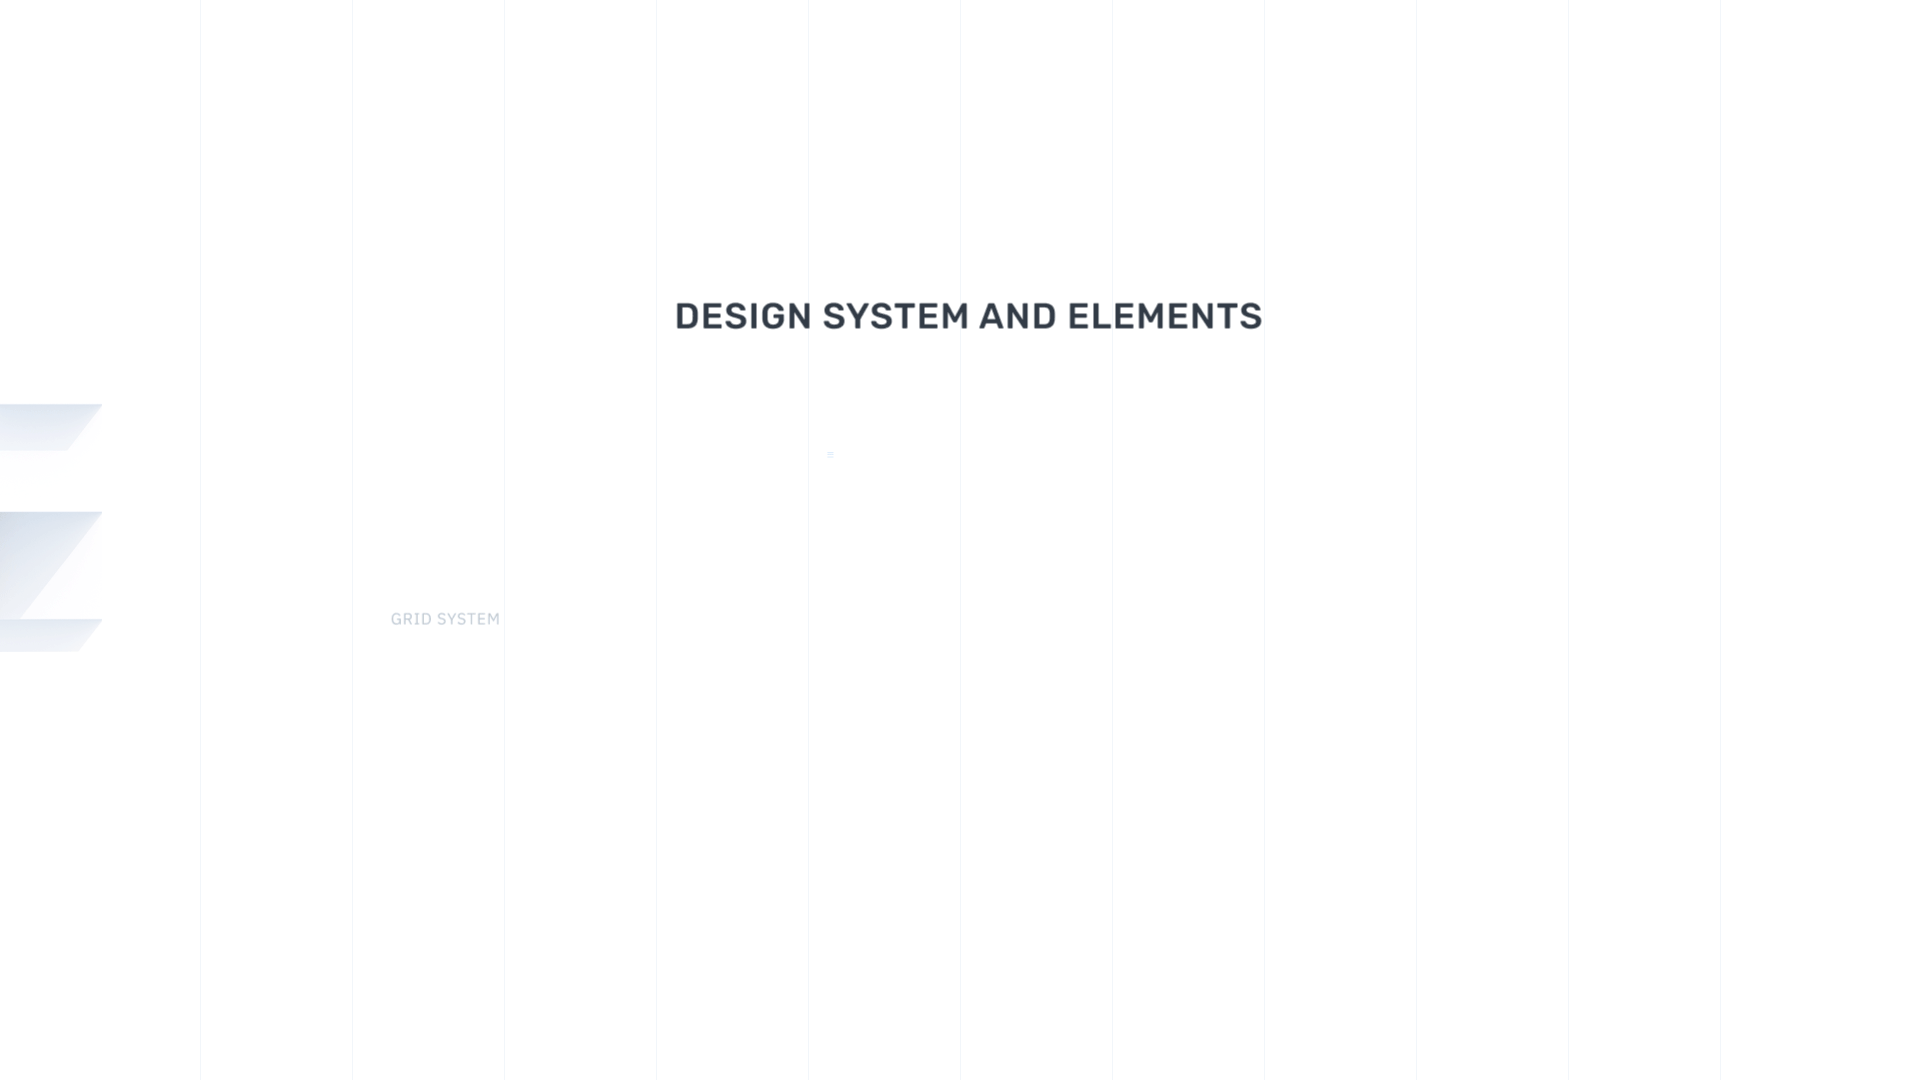 Design system and elements based on the clean and simple formula